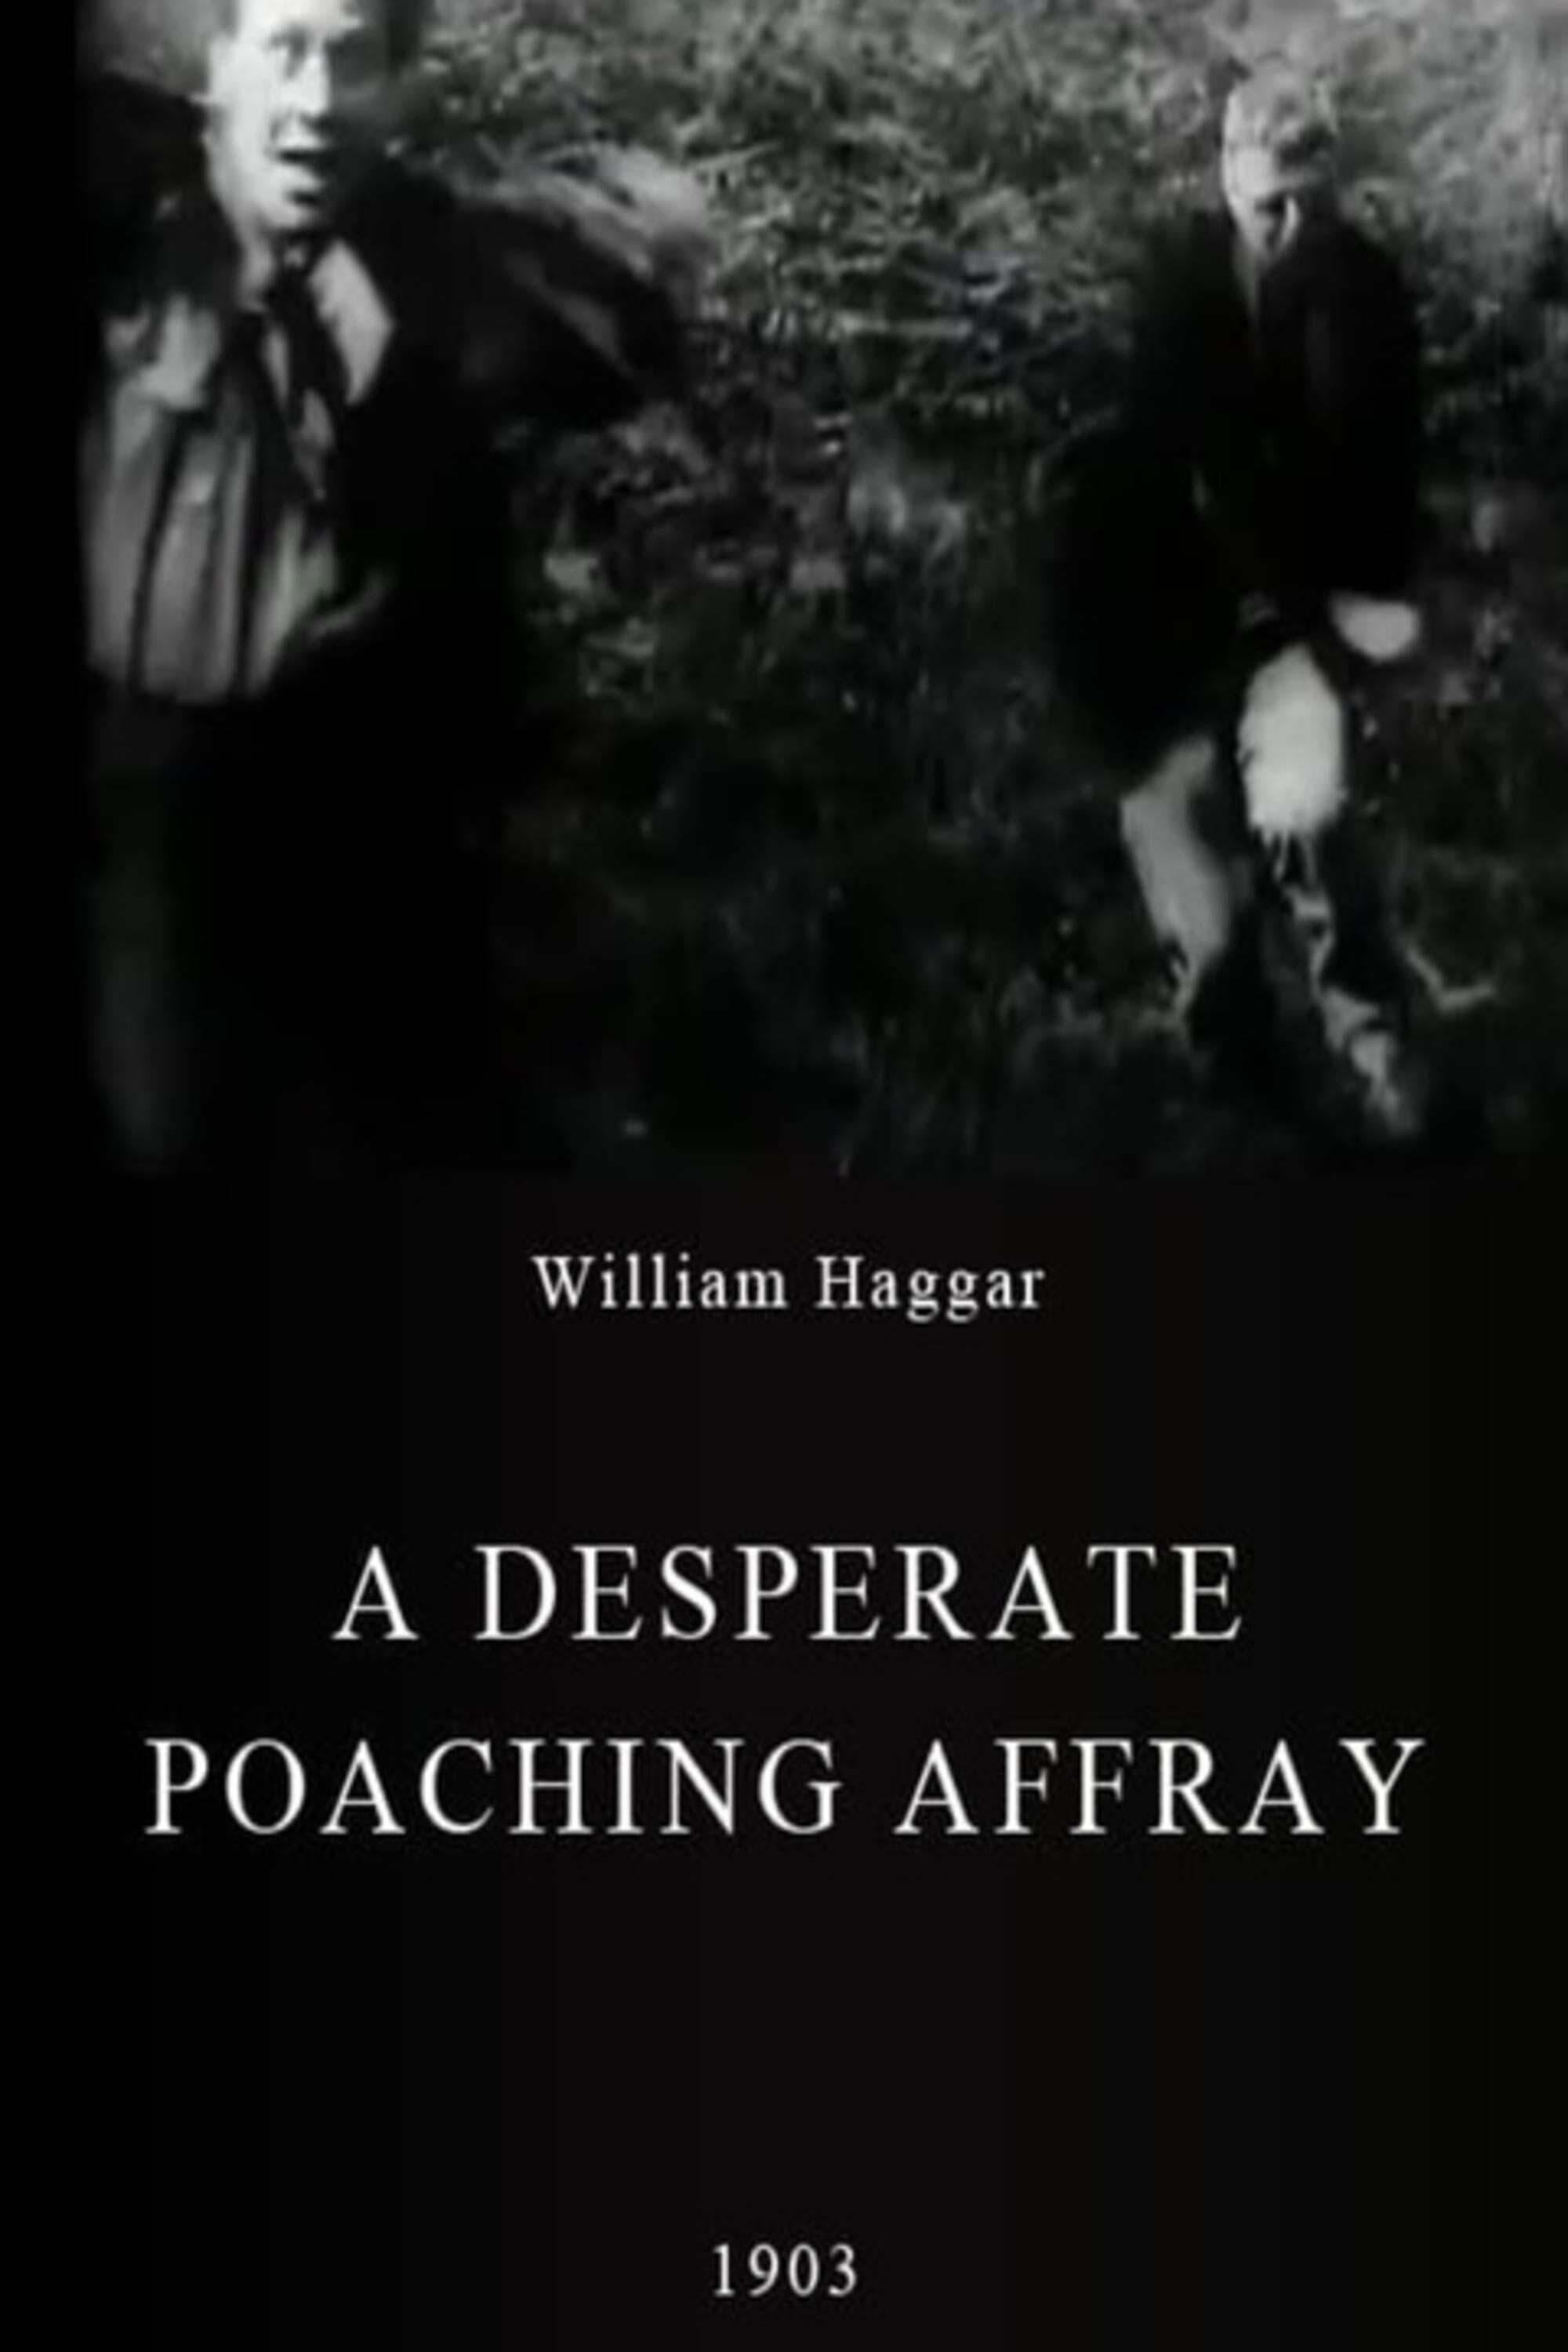 A Desperate Poaching Affray poster